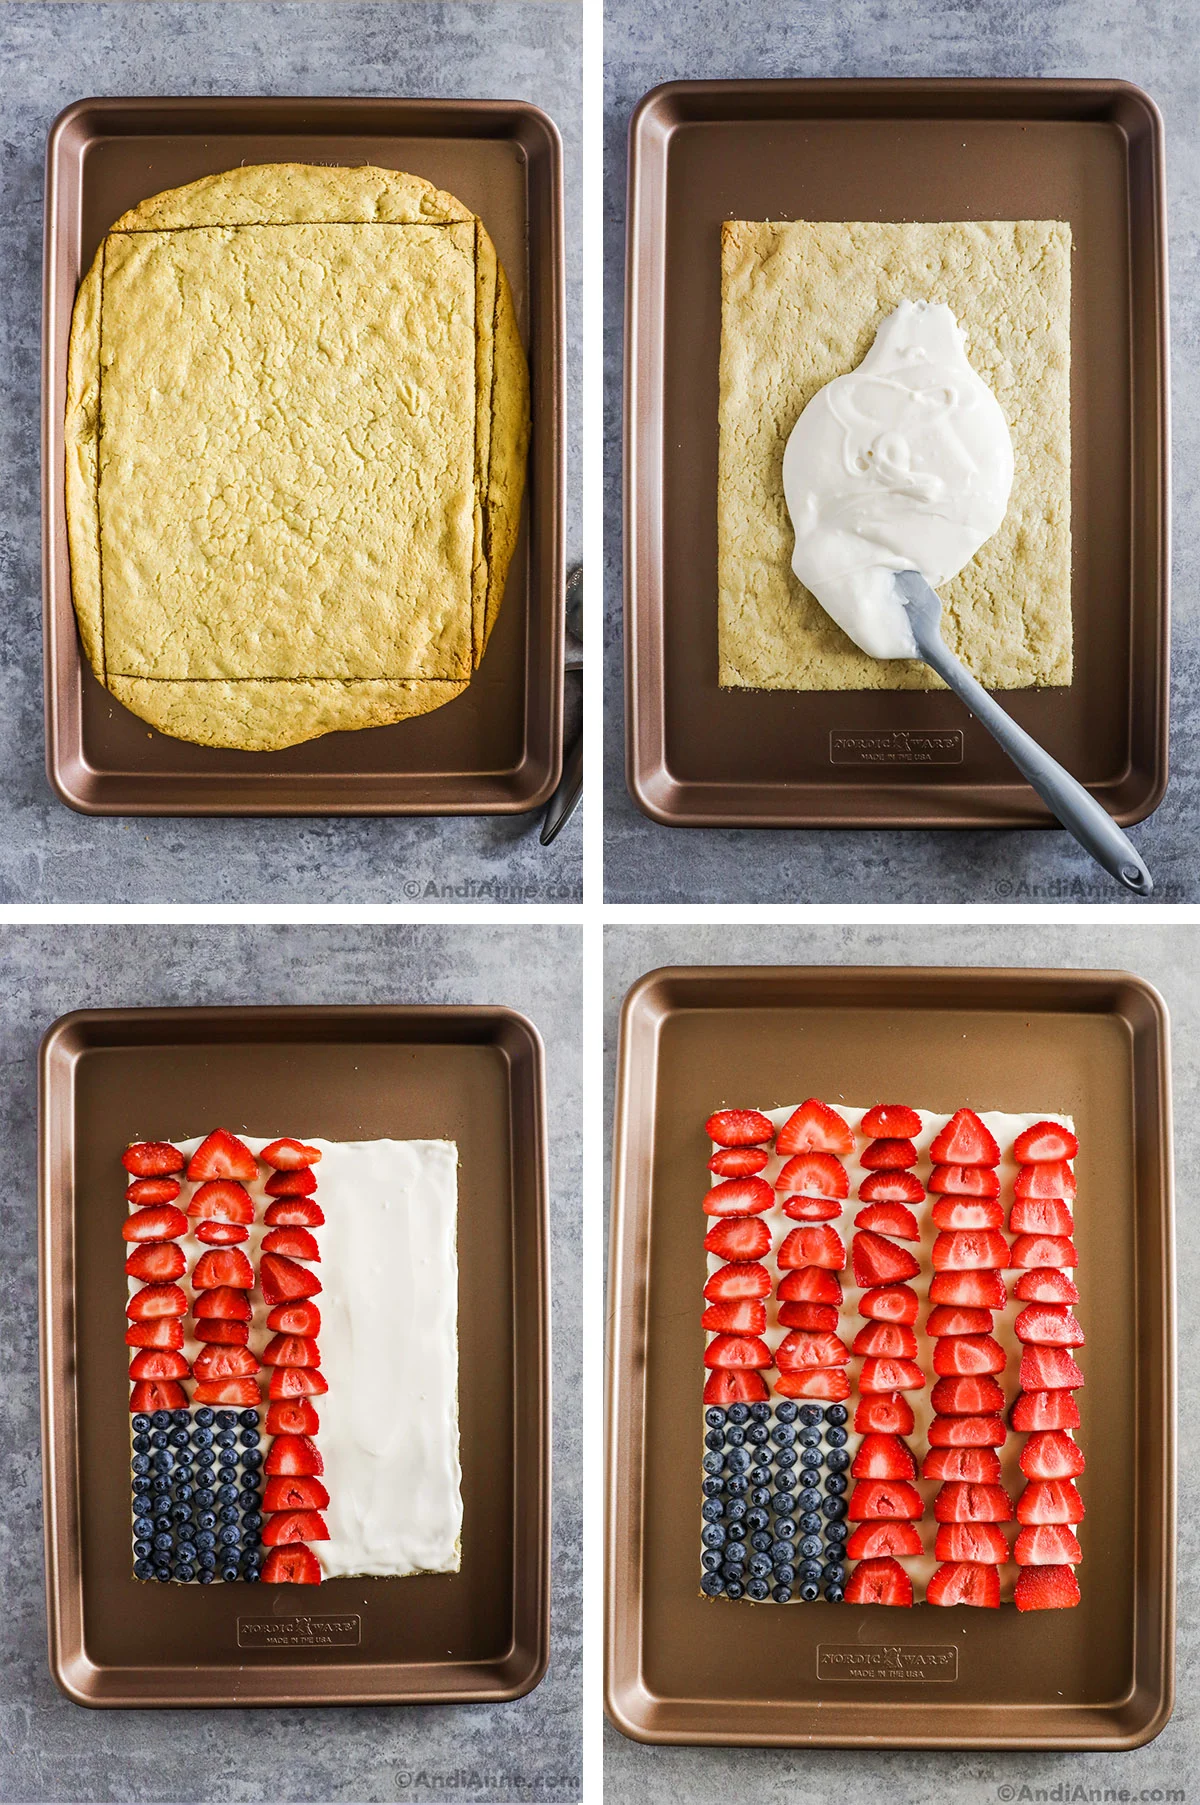 Four images showing steps to make recipe. First is baked cookie dough sliced to create rectangle. Second is cream cheese frosting spread on top, third and fourth are blueberries and sliced strawberries arranged in rows to create an american flag design.